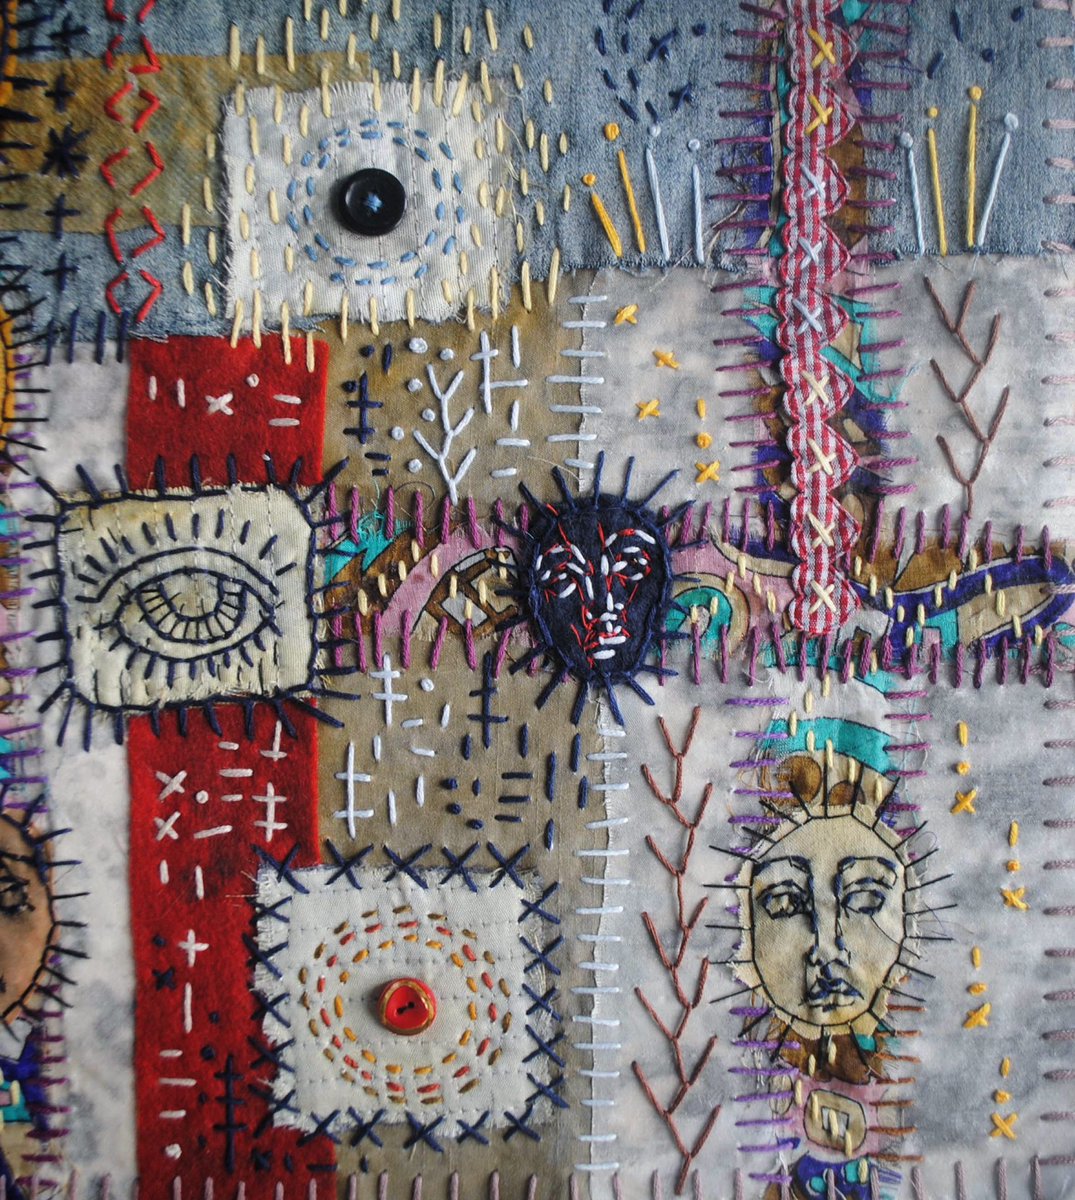 Closeups of a recent stitched textile collage ‘Naughts and Crosses’.

.. 

#stitchedart #roughembroidery #outsiderart #textileart #patchwork #textilecollage #faceembroidery #texturedart #primitiveart